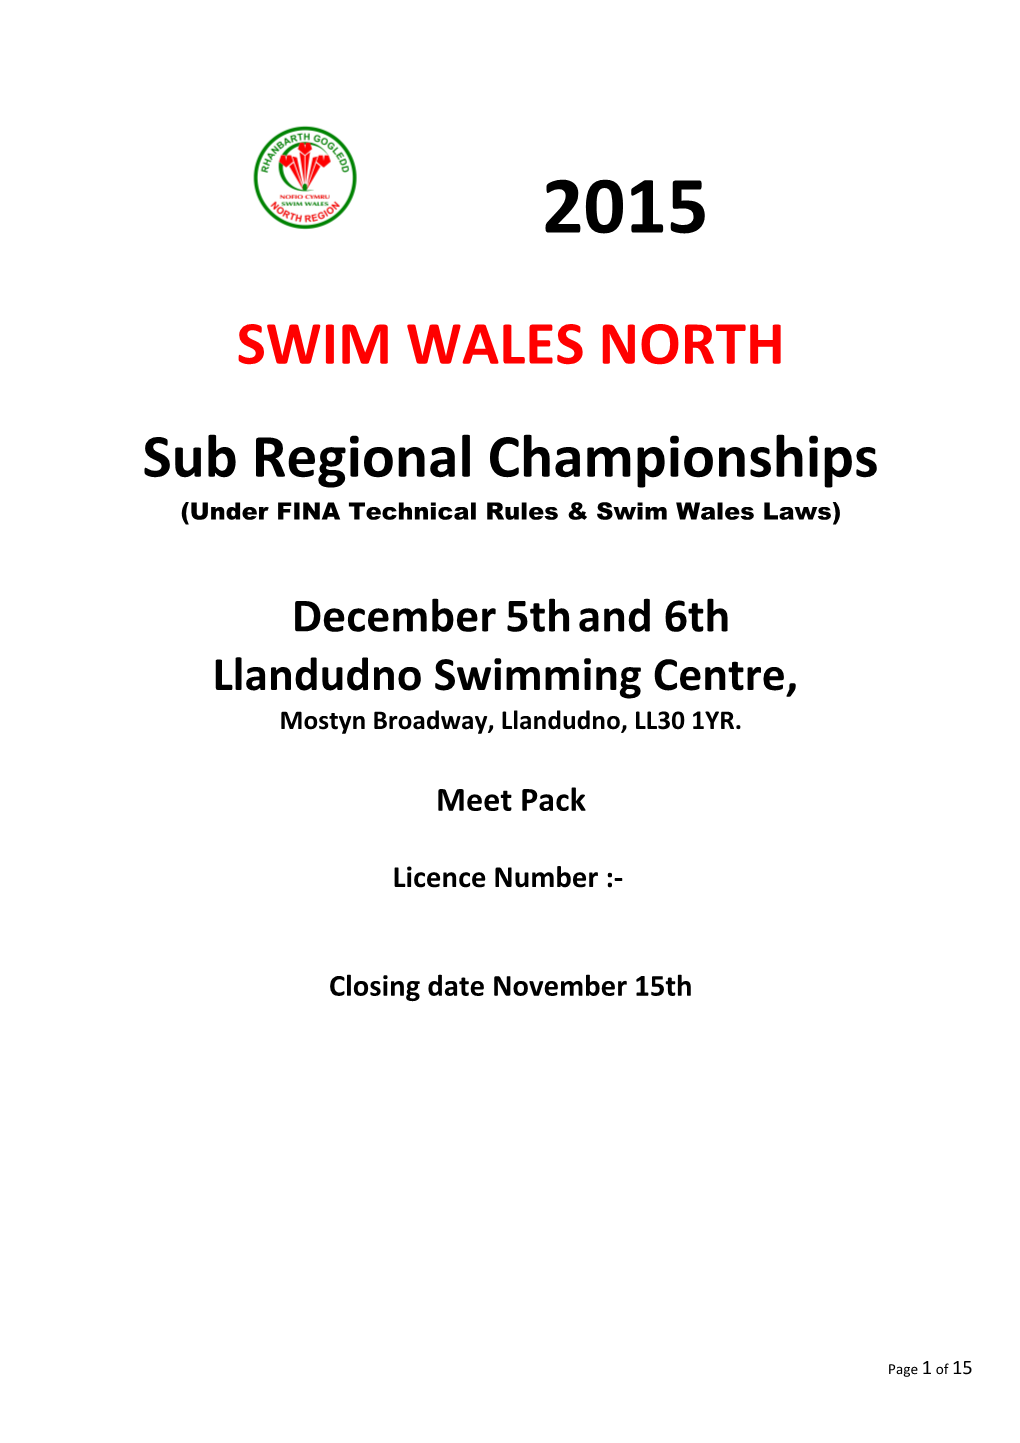 Under FINA Technical Rules & Swim Wales Laws